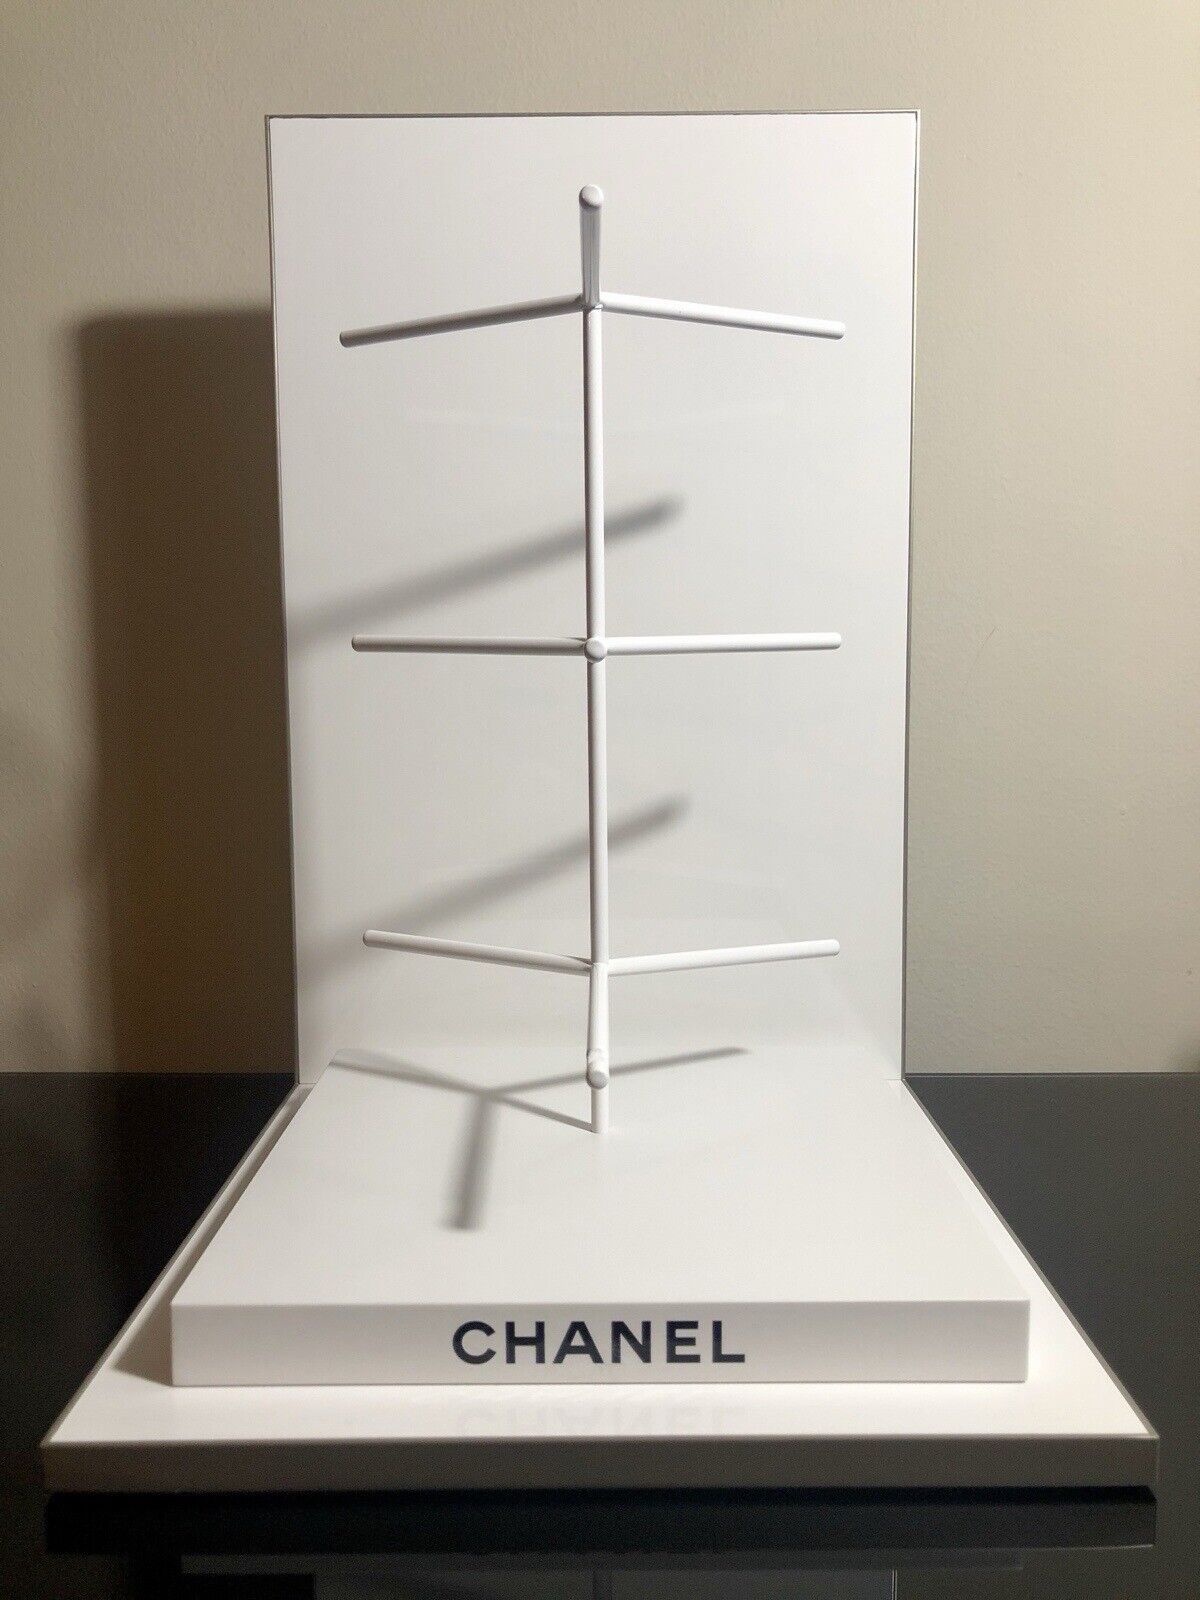 Chanel Eyewear Stand - Authentic Store Display